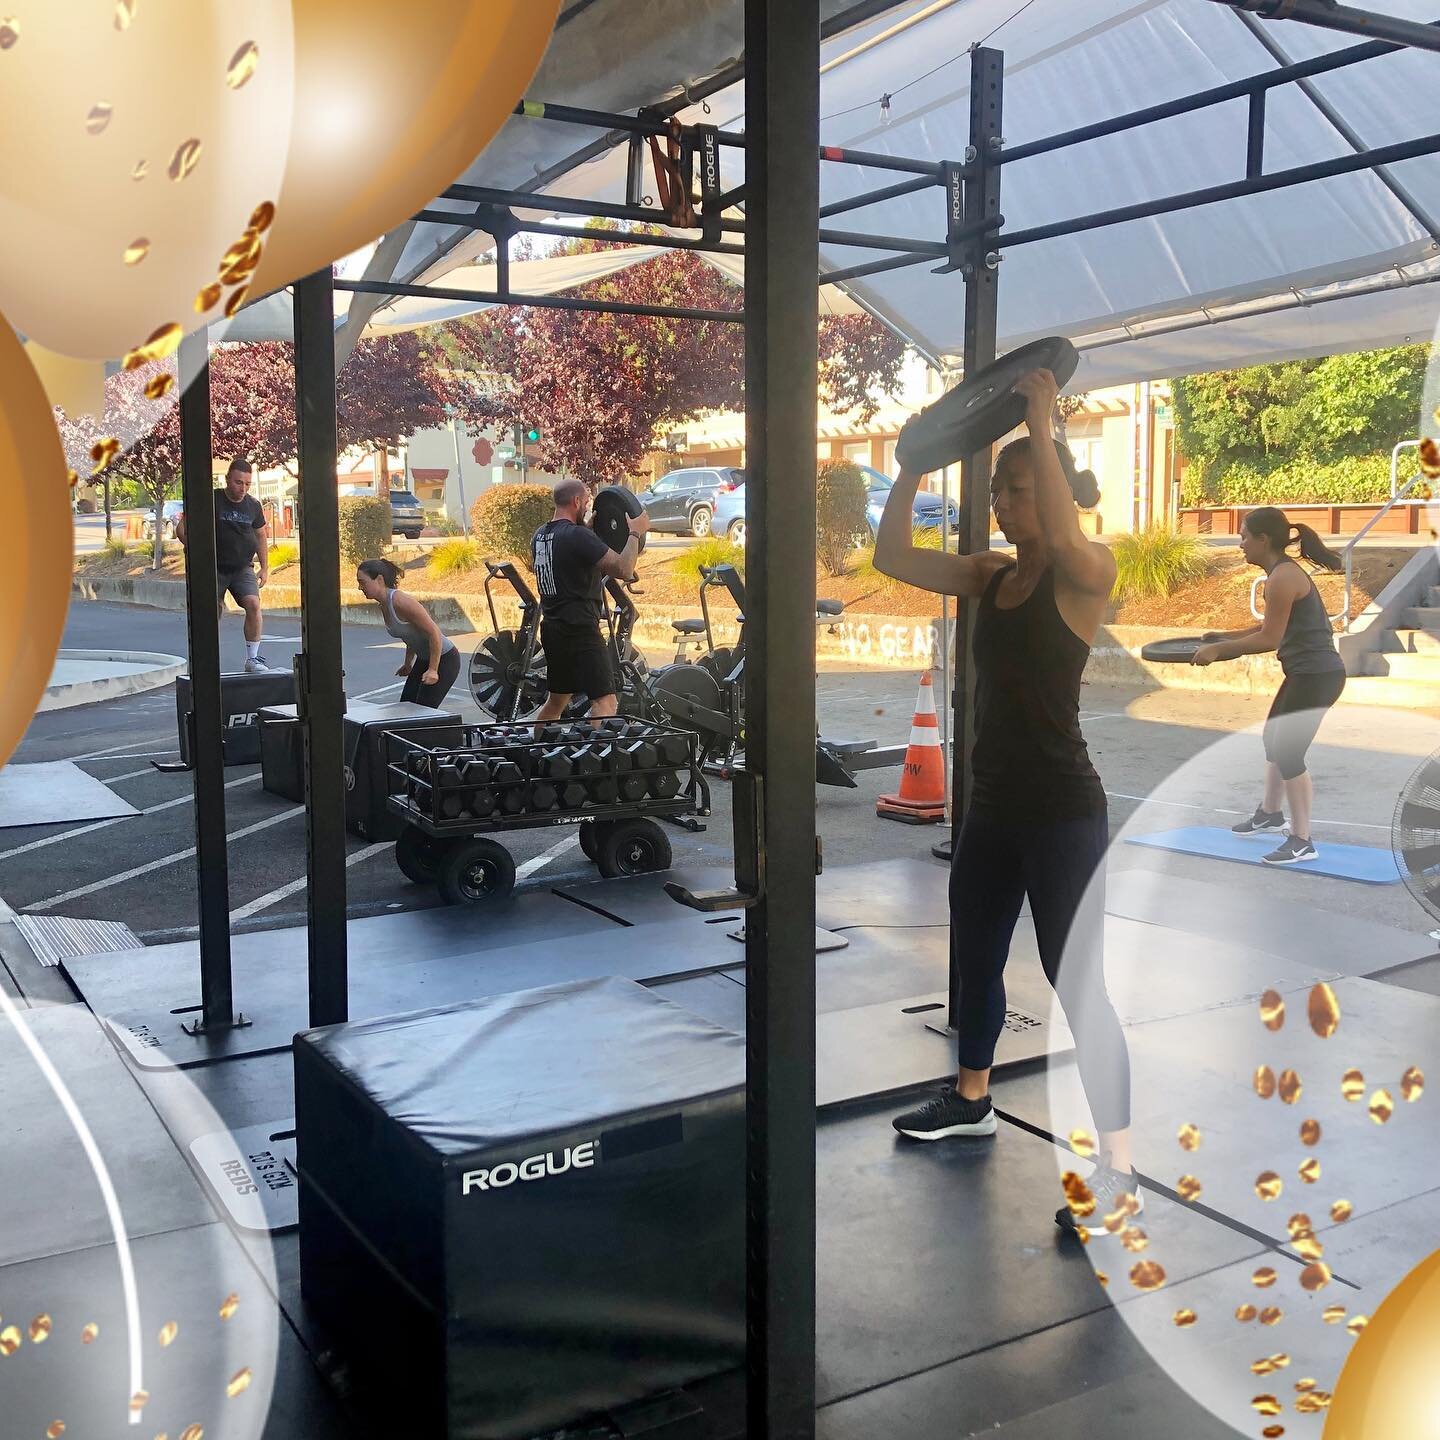 Every workout&rsquo;s a party at #tjsgym! Join us!

#tjsgyms
#fitnessinmarin
#fitnesscommunity